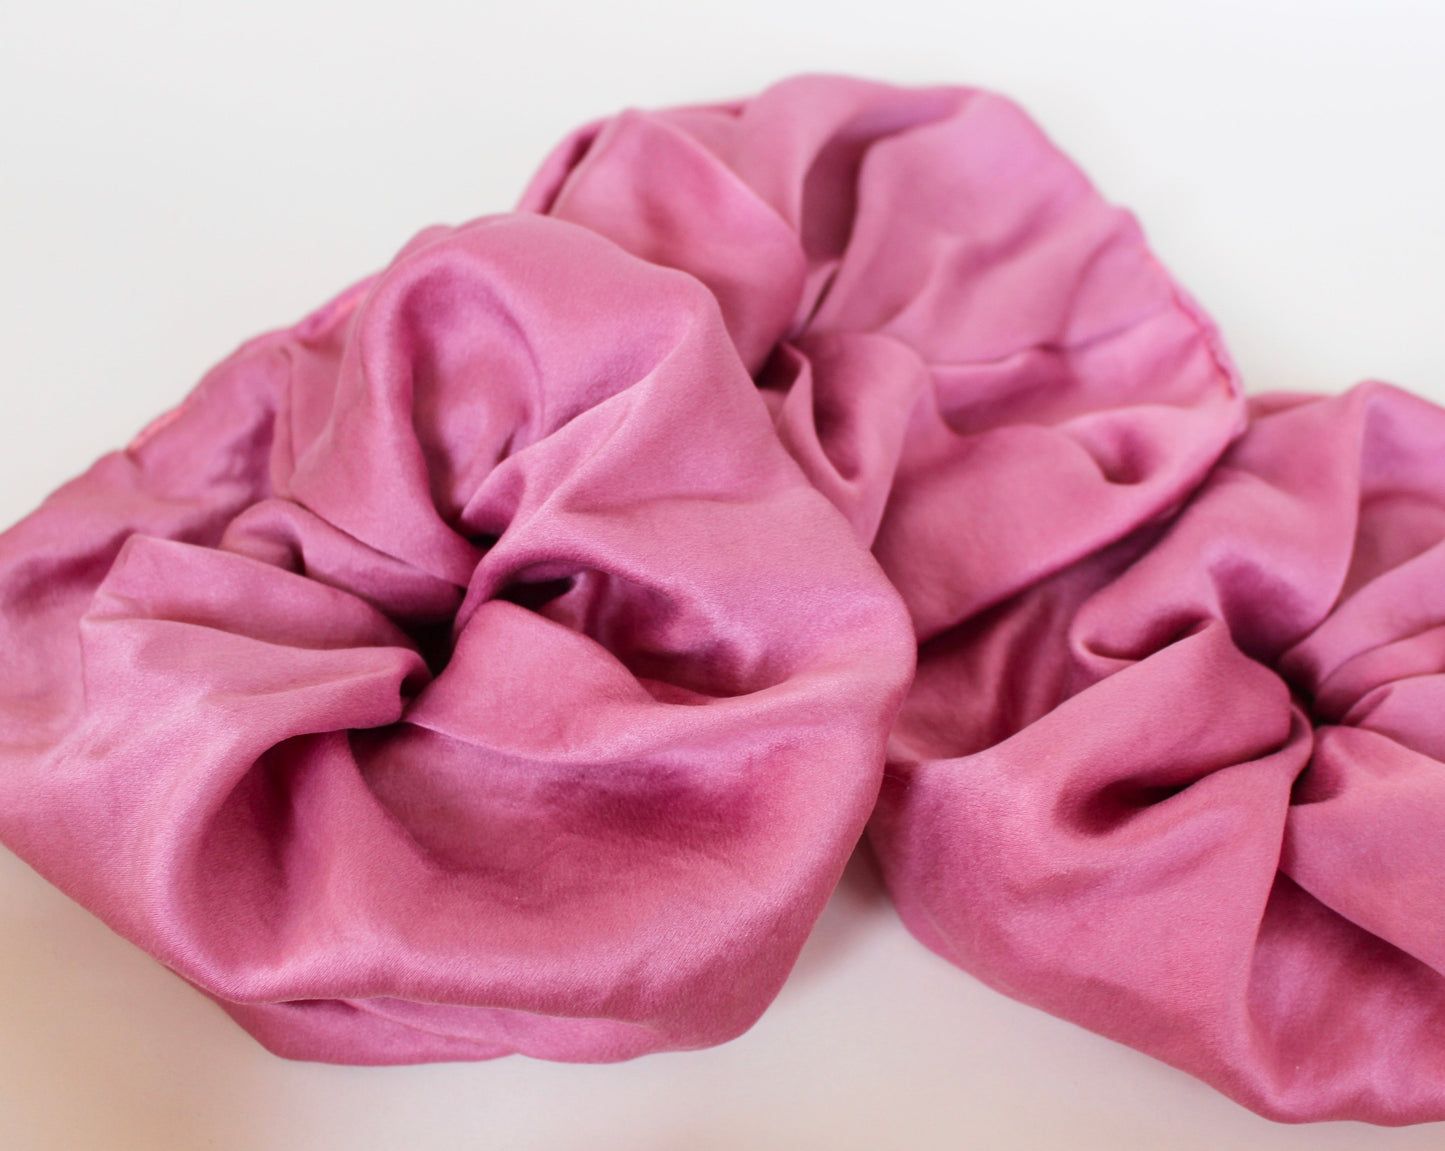 Goose Summer is a small, sustainable plant dyeing business making naturally dyed silk scrunchies and other accessories in Los Angeles. Three fuchsia colored plant dyed silk scrunchies made by Goose Summer.